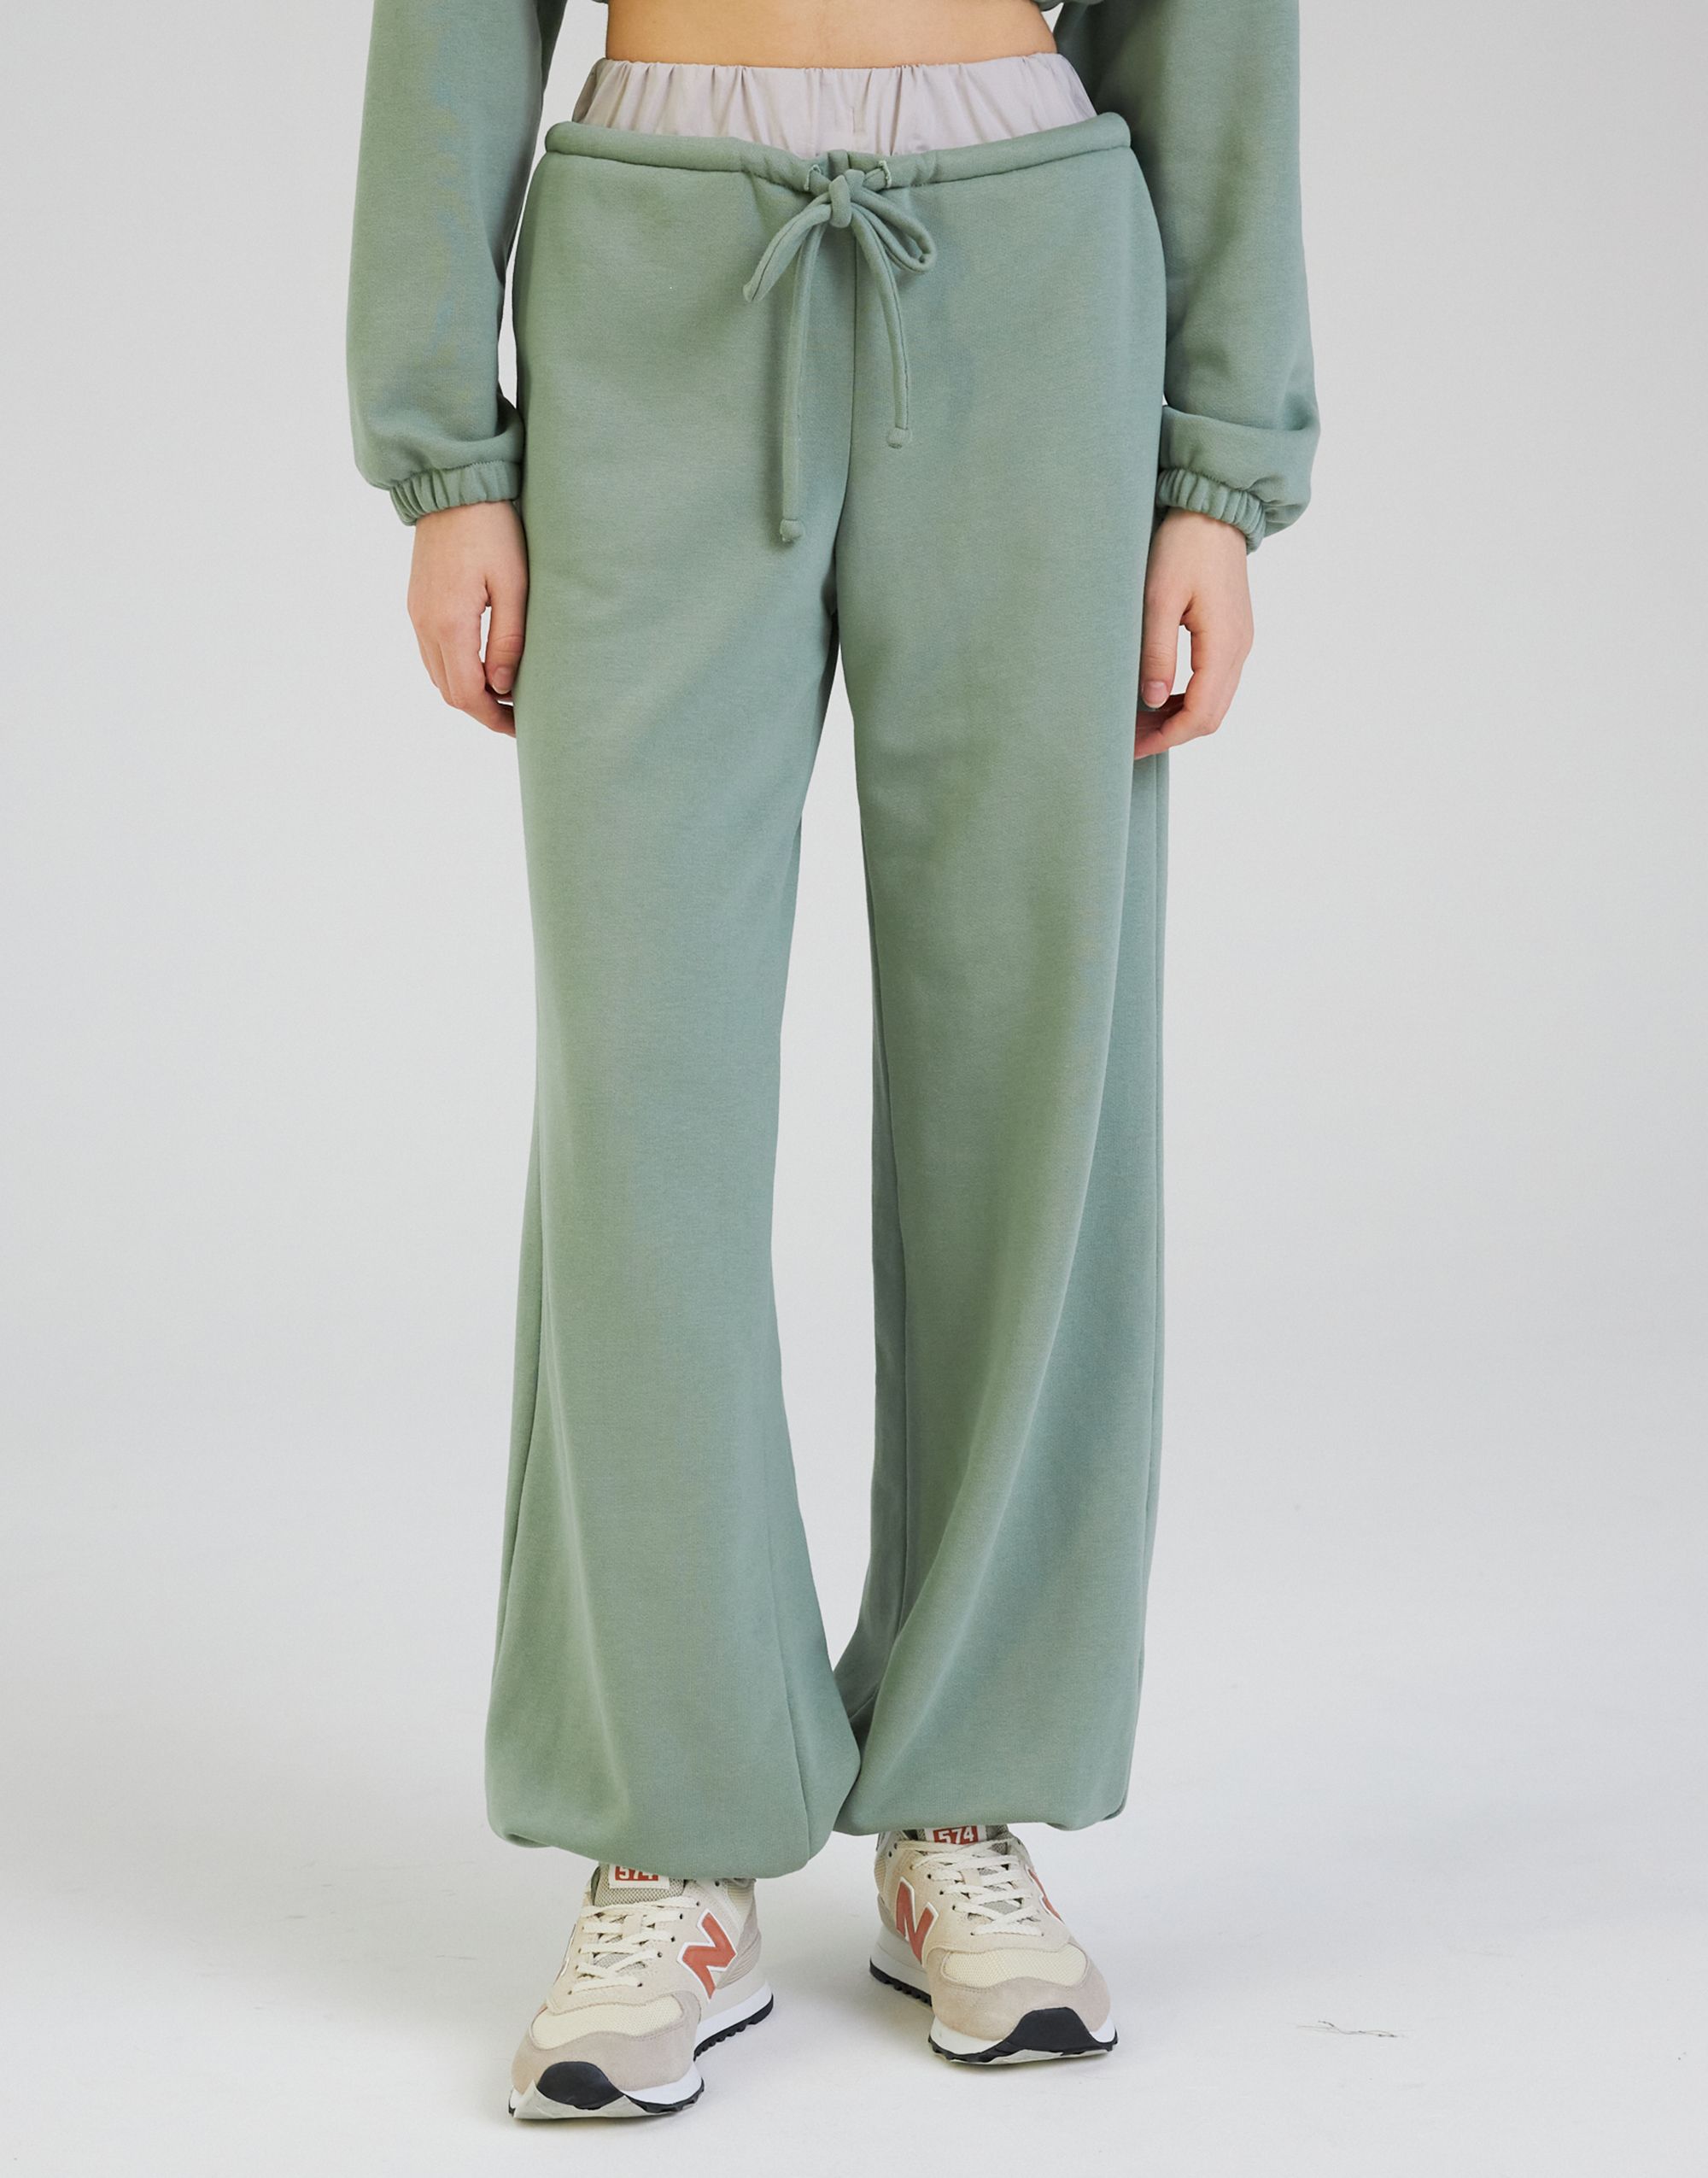 Trousers, patterns №1008